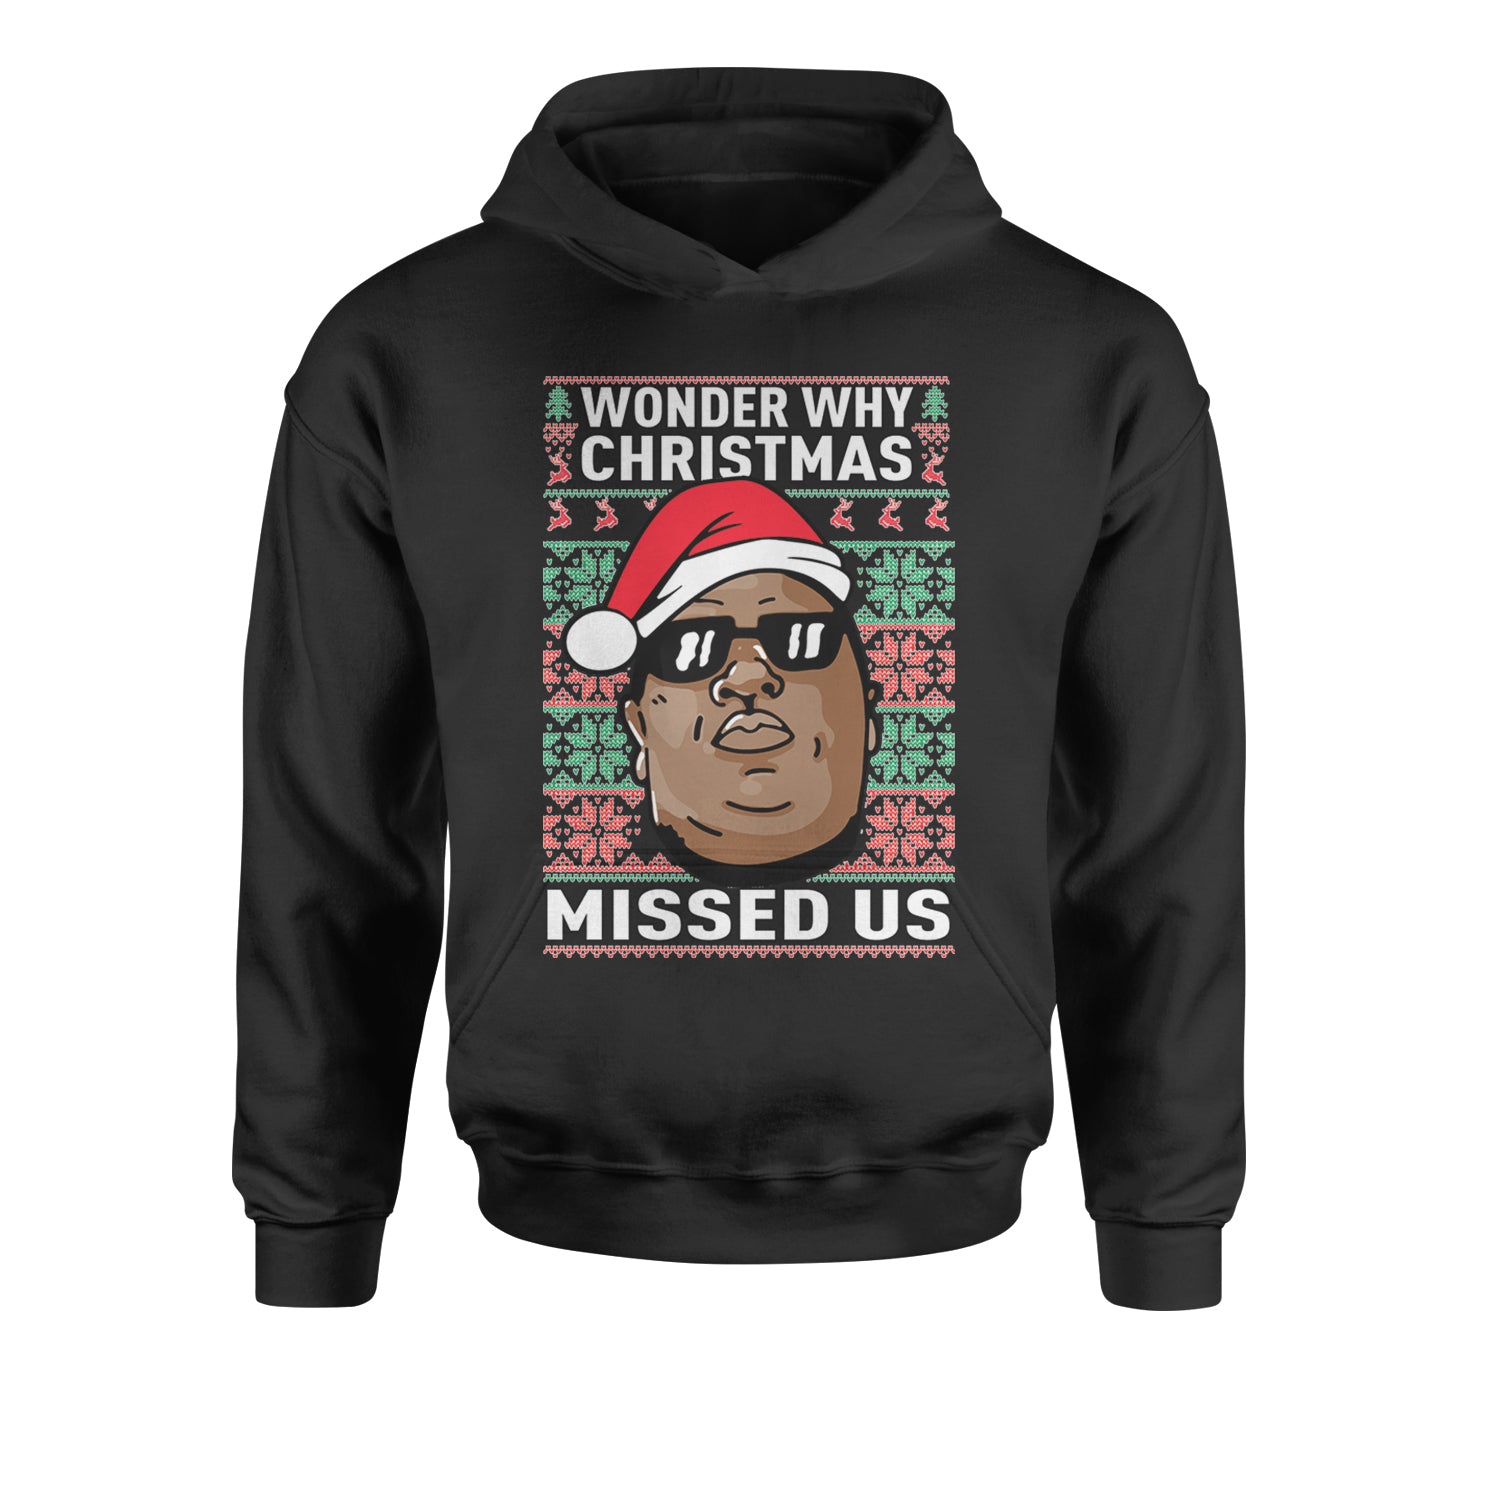 Wonder Why Christmas Missed Us Ugly Christmas Youth-Sized Hoodie